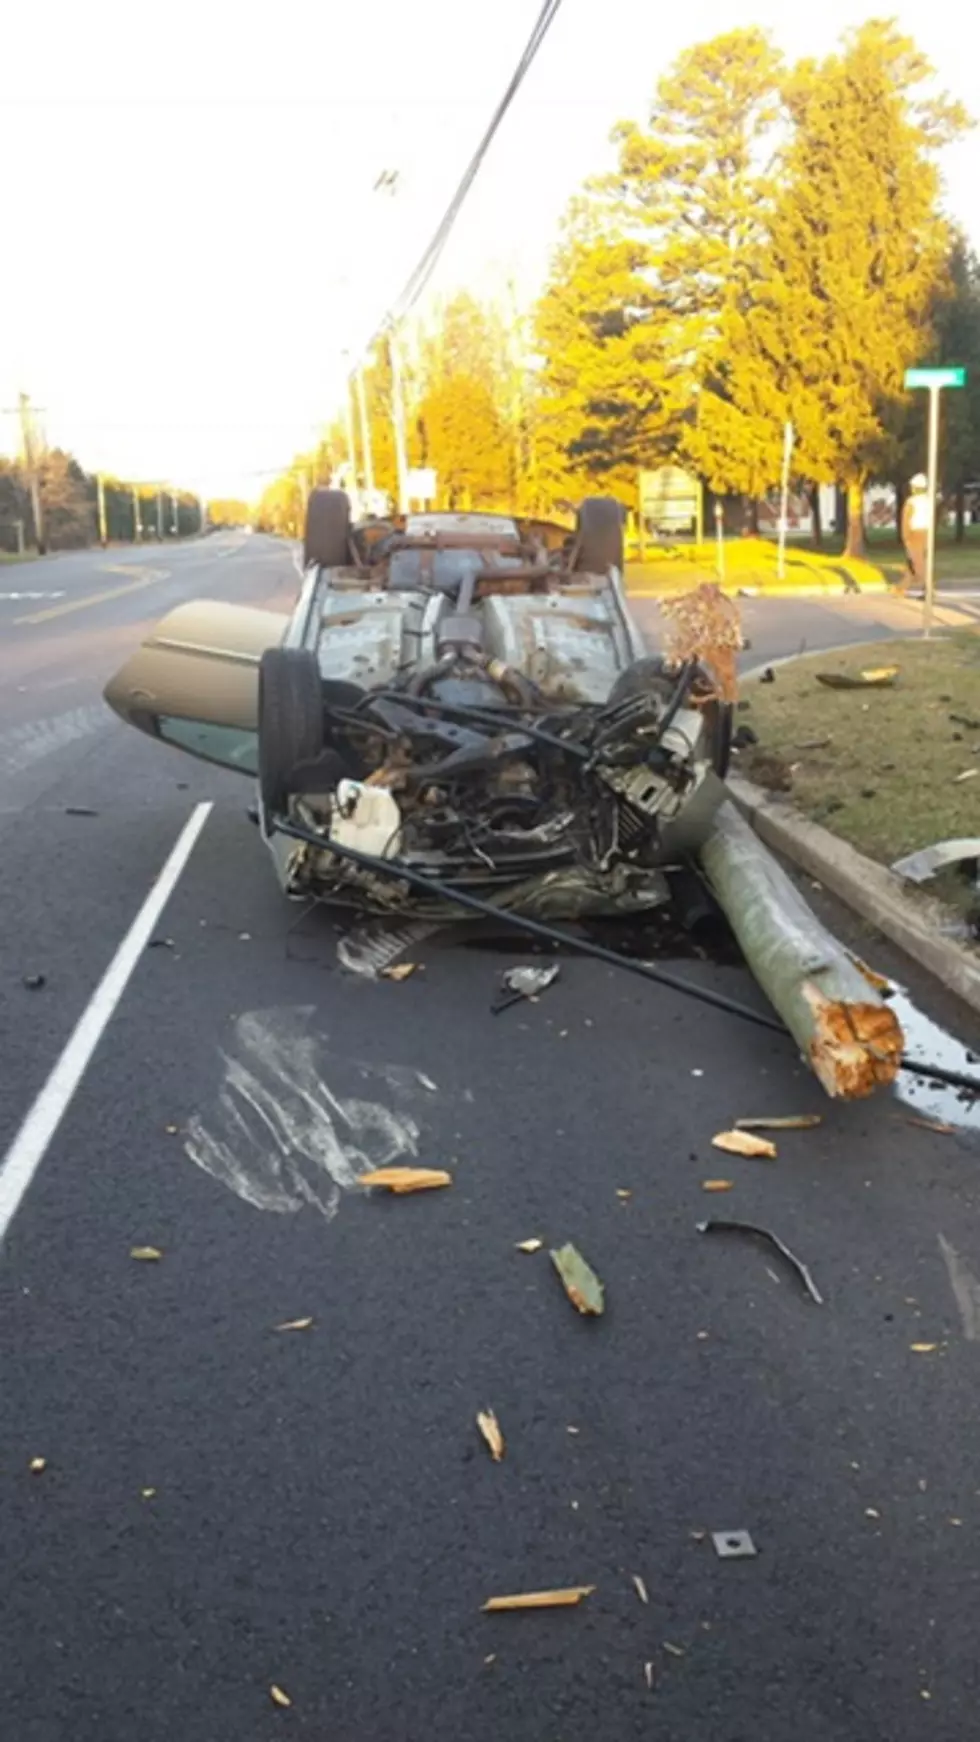 Distraction or fatigue might have been factors in Manchester utility pole crash